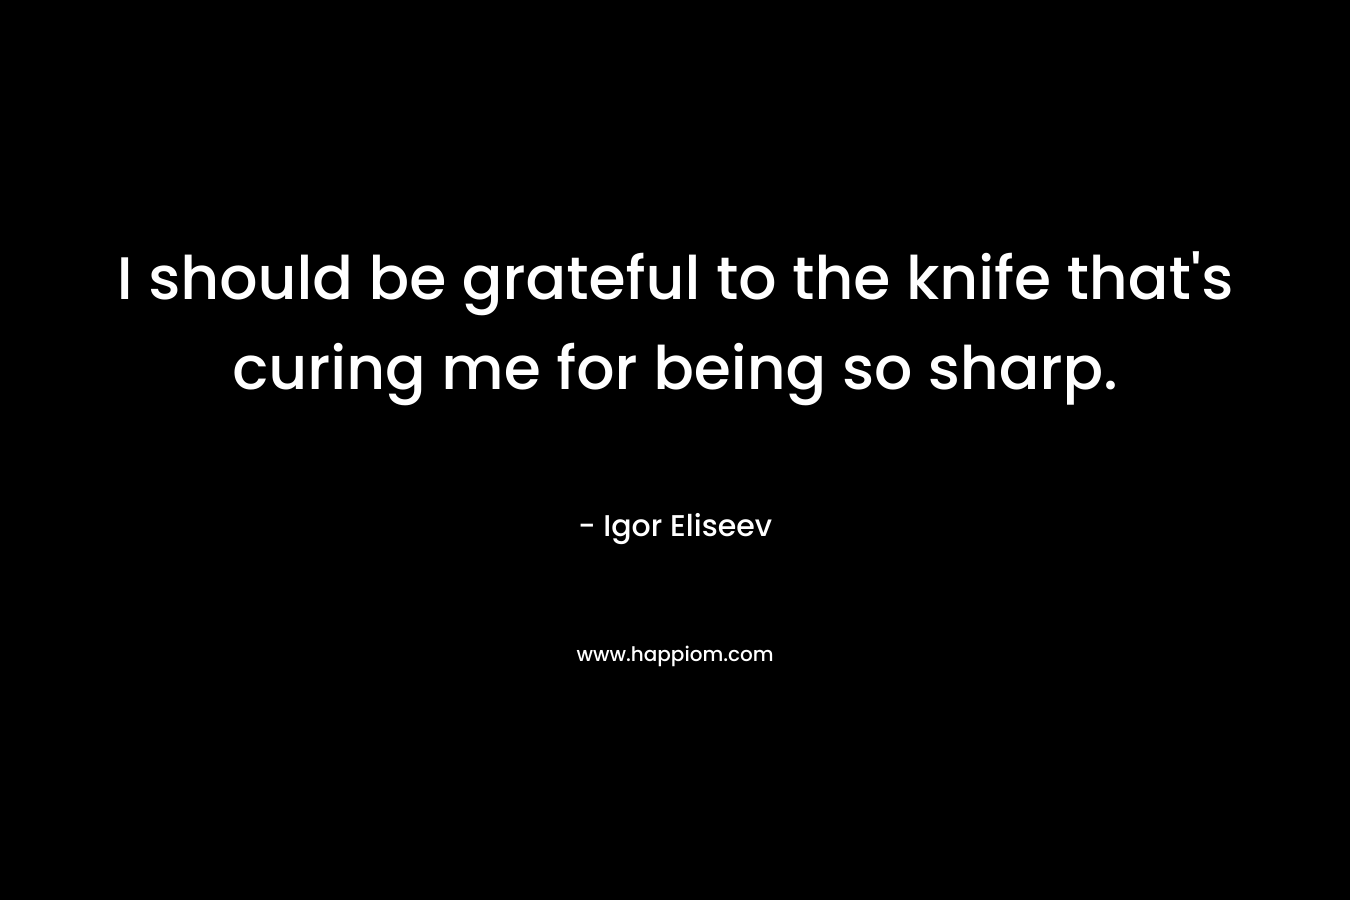 I should be grateful to the knife that's curing me for being so sharp.